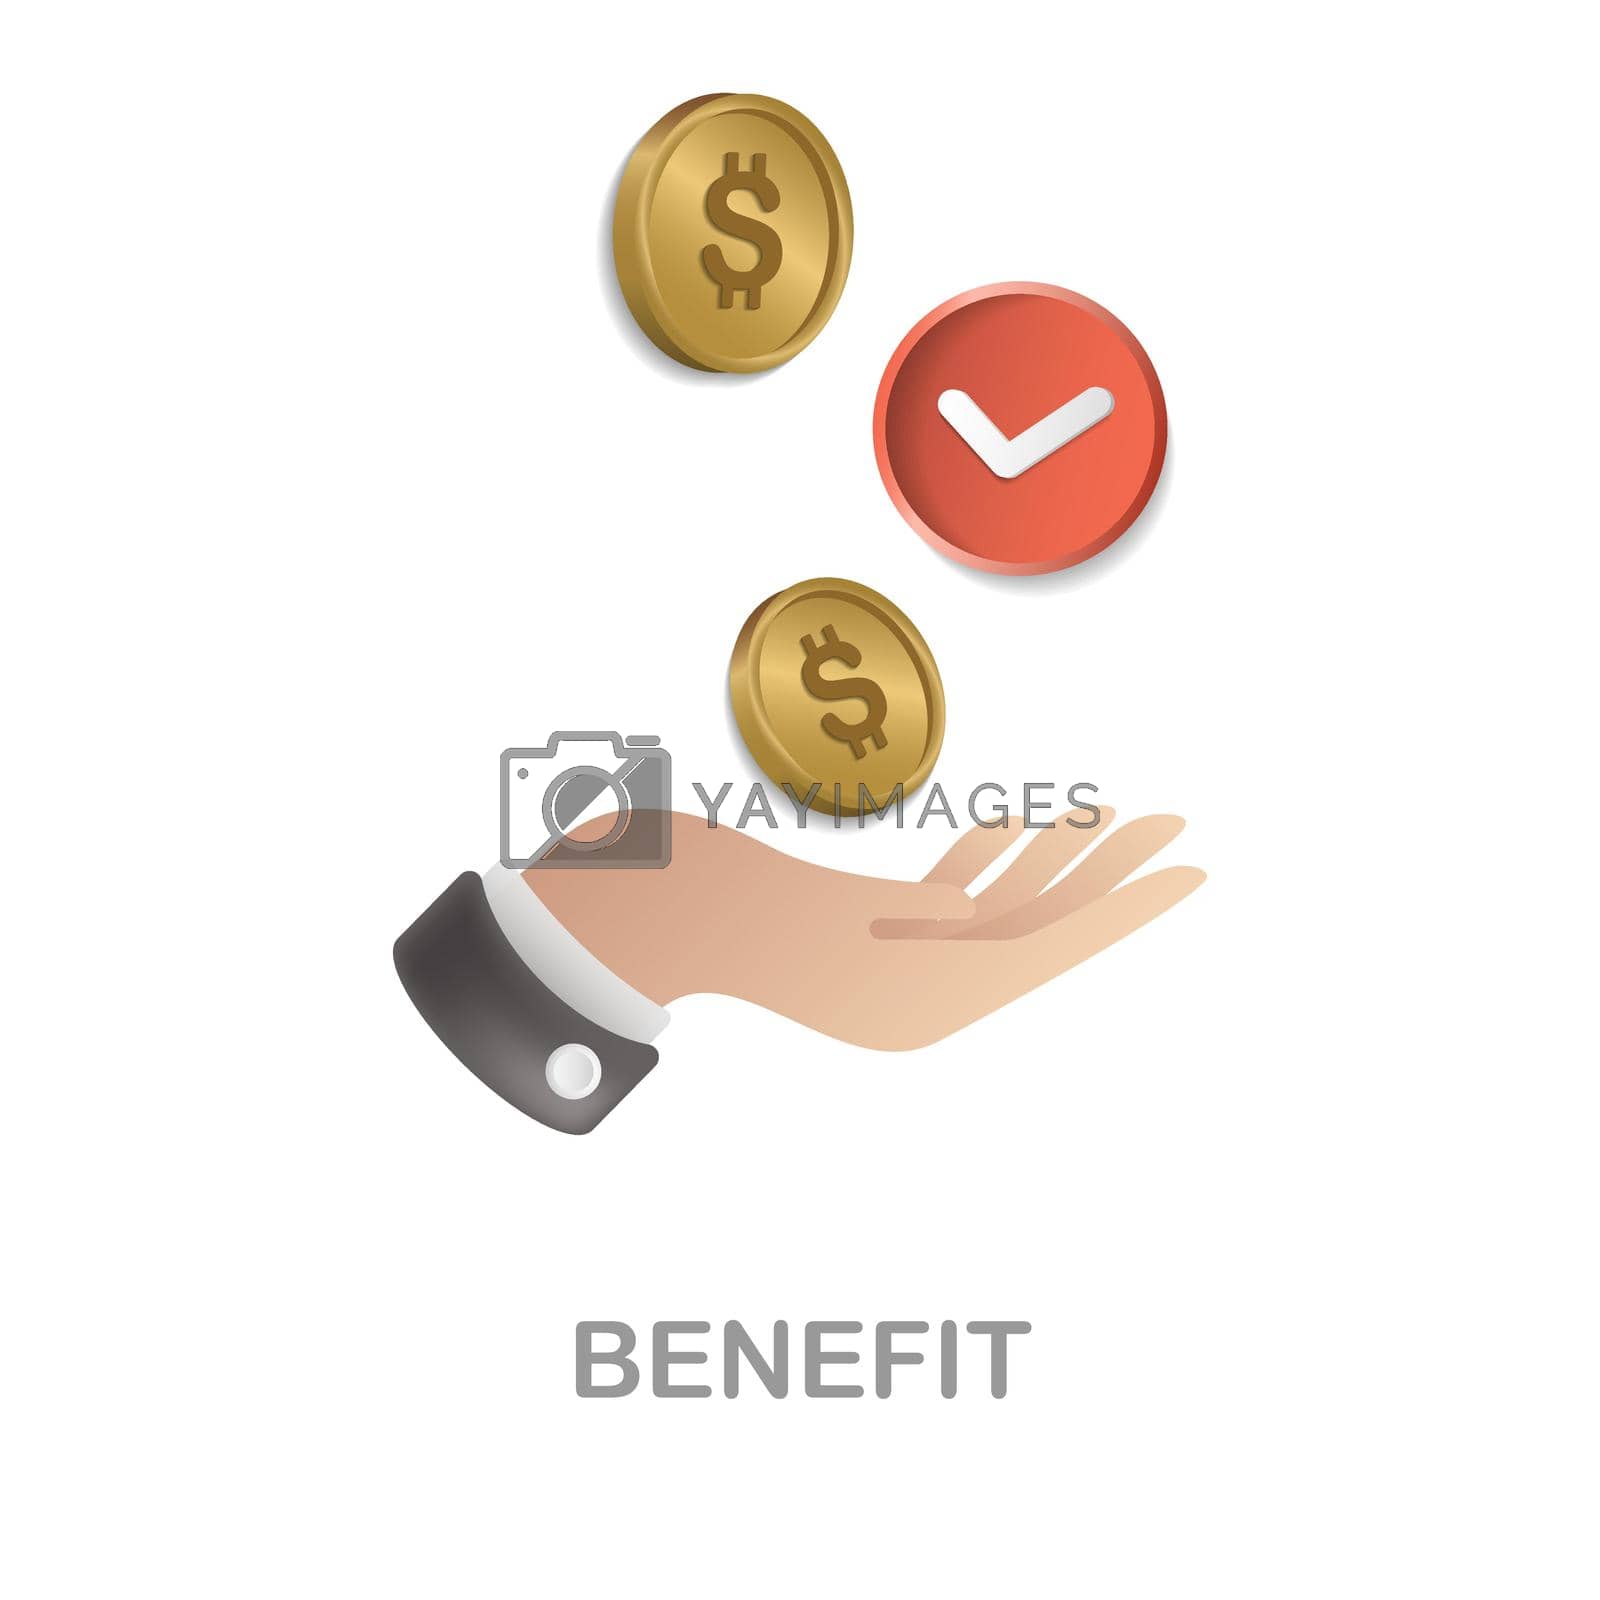 Royalty free image of Benefit icon 3d illustration from customer loyalty collection. Creative Benefit 3d icon for web design, templates, infographics and more by simakovavector